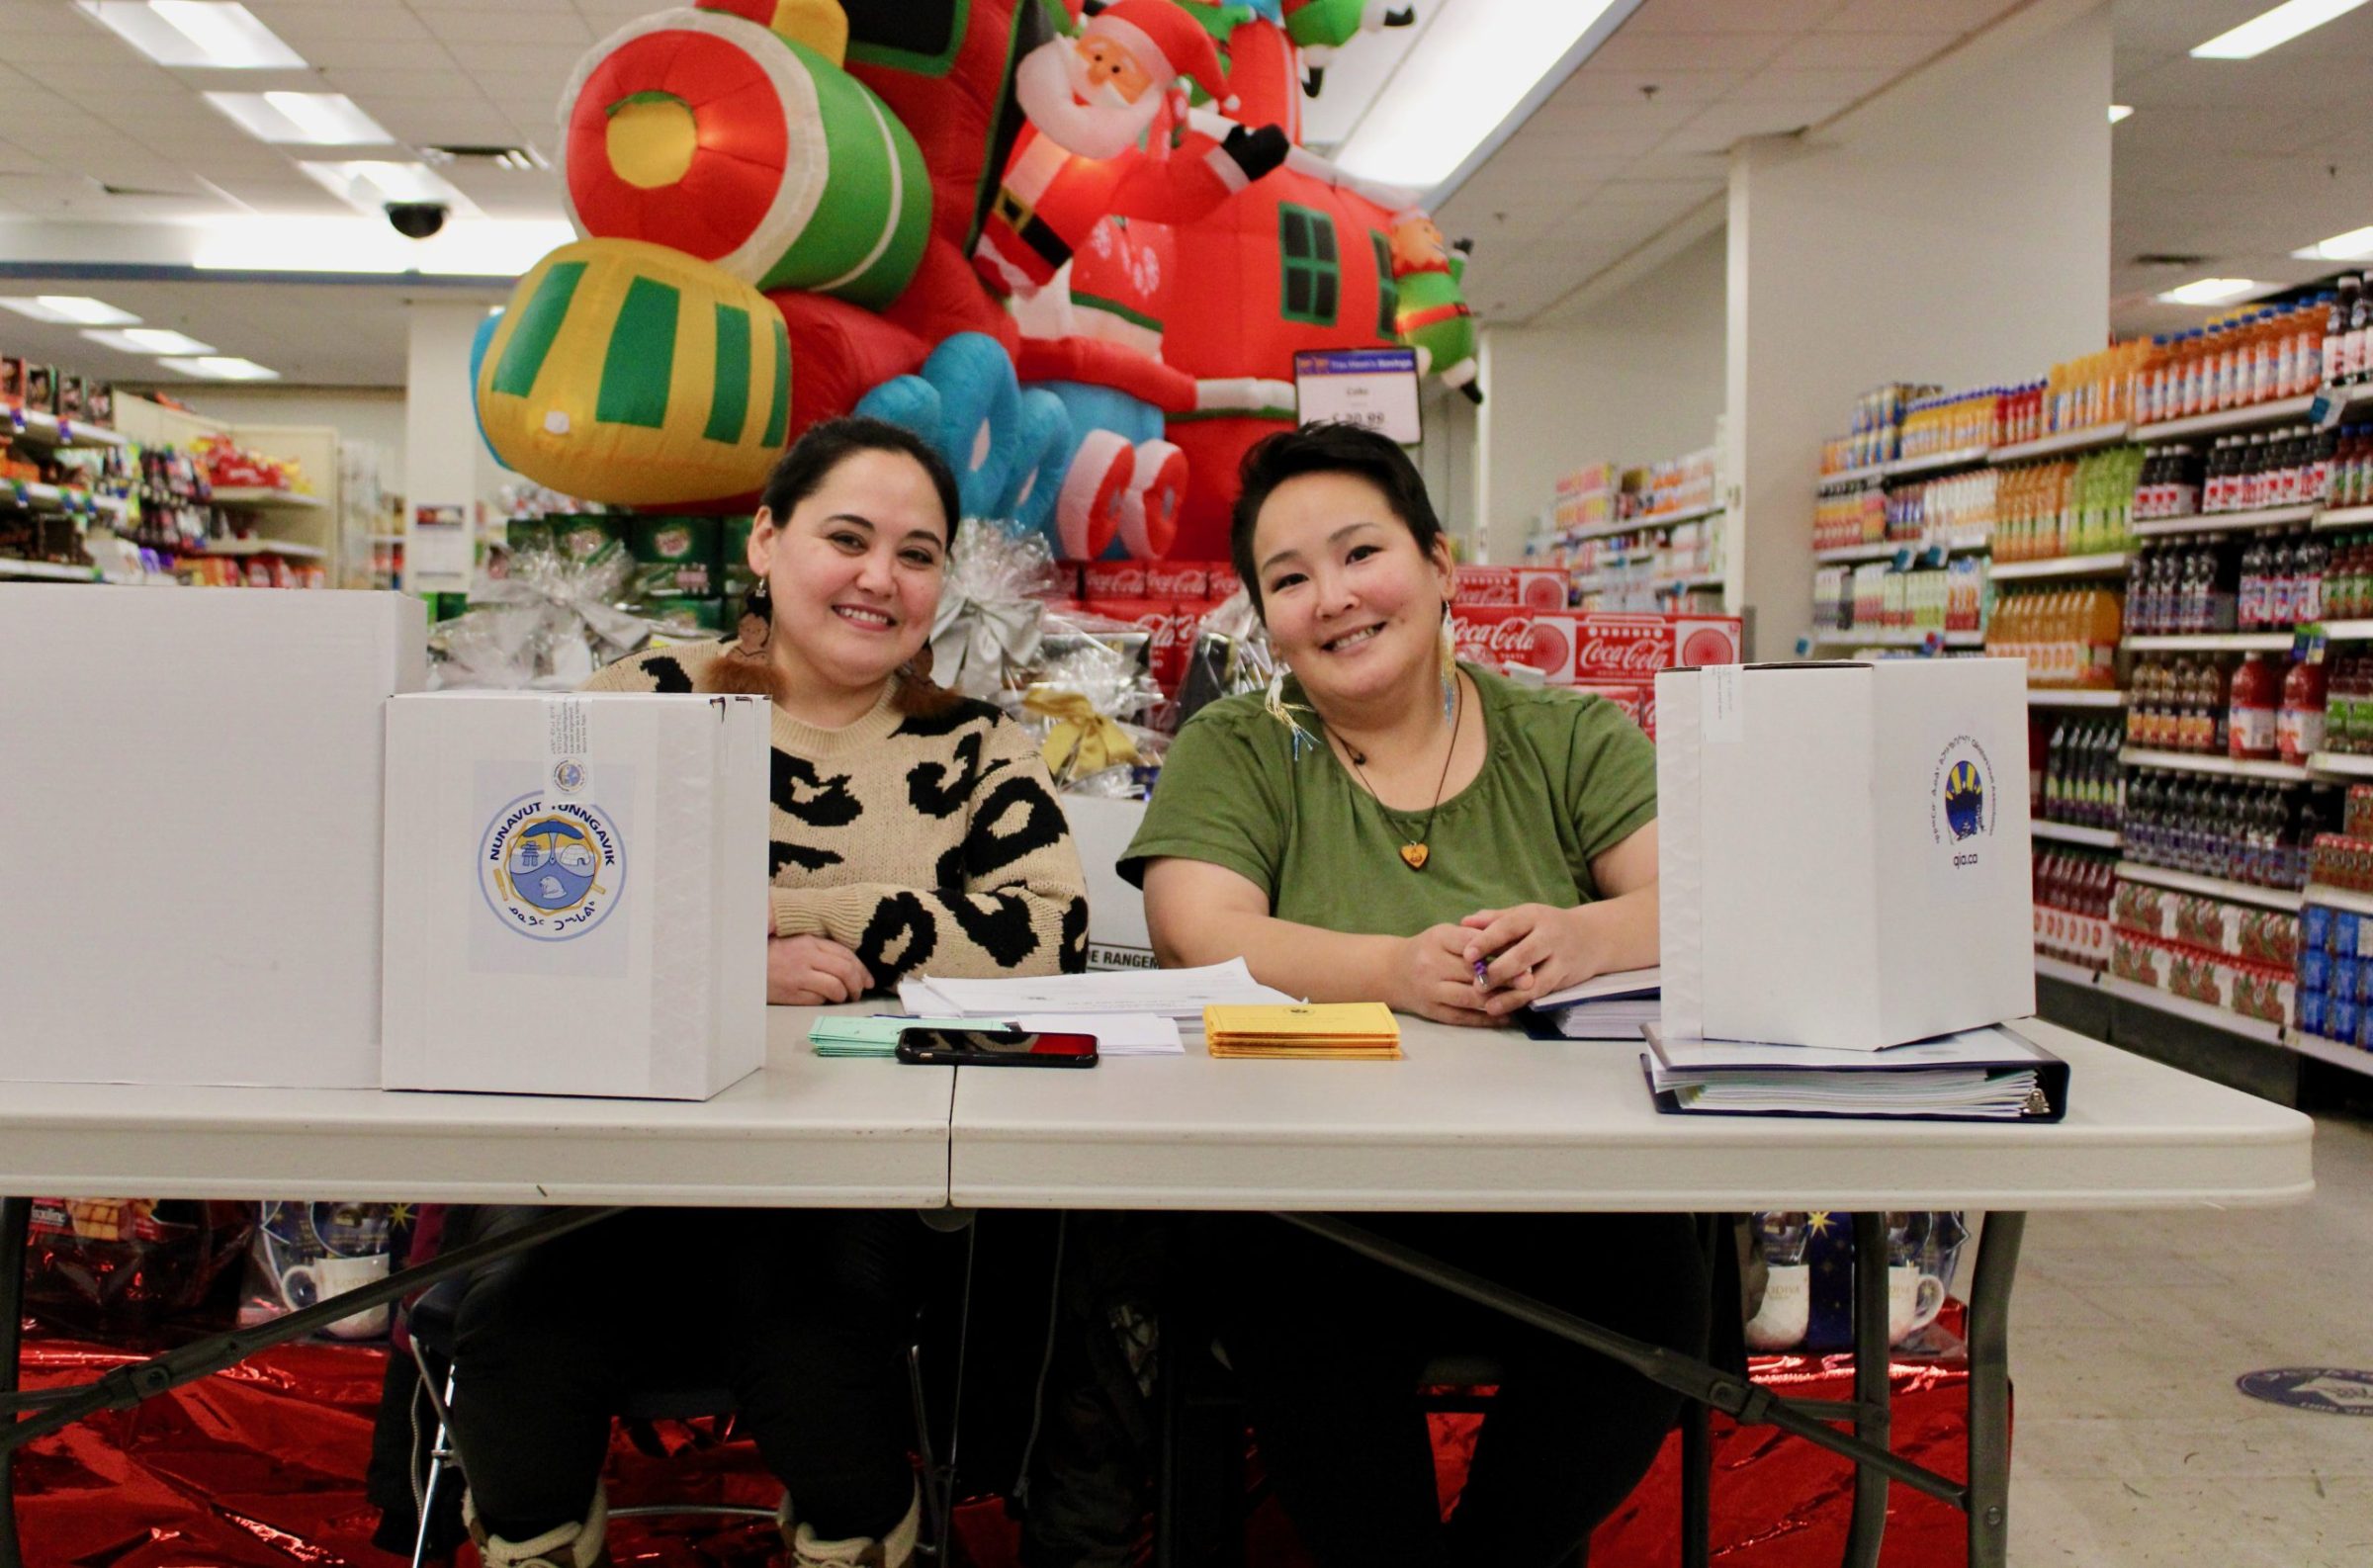 Annabella Piugattuk, left, and Tanya Tucktoo work at a booth at Iqaluit’s Northmart for advance voting in the Qikiqtani Inuit Association and Nunavut Tunngavik Incorporated elections. The elections take place Monday. (Photo by David Lochead)